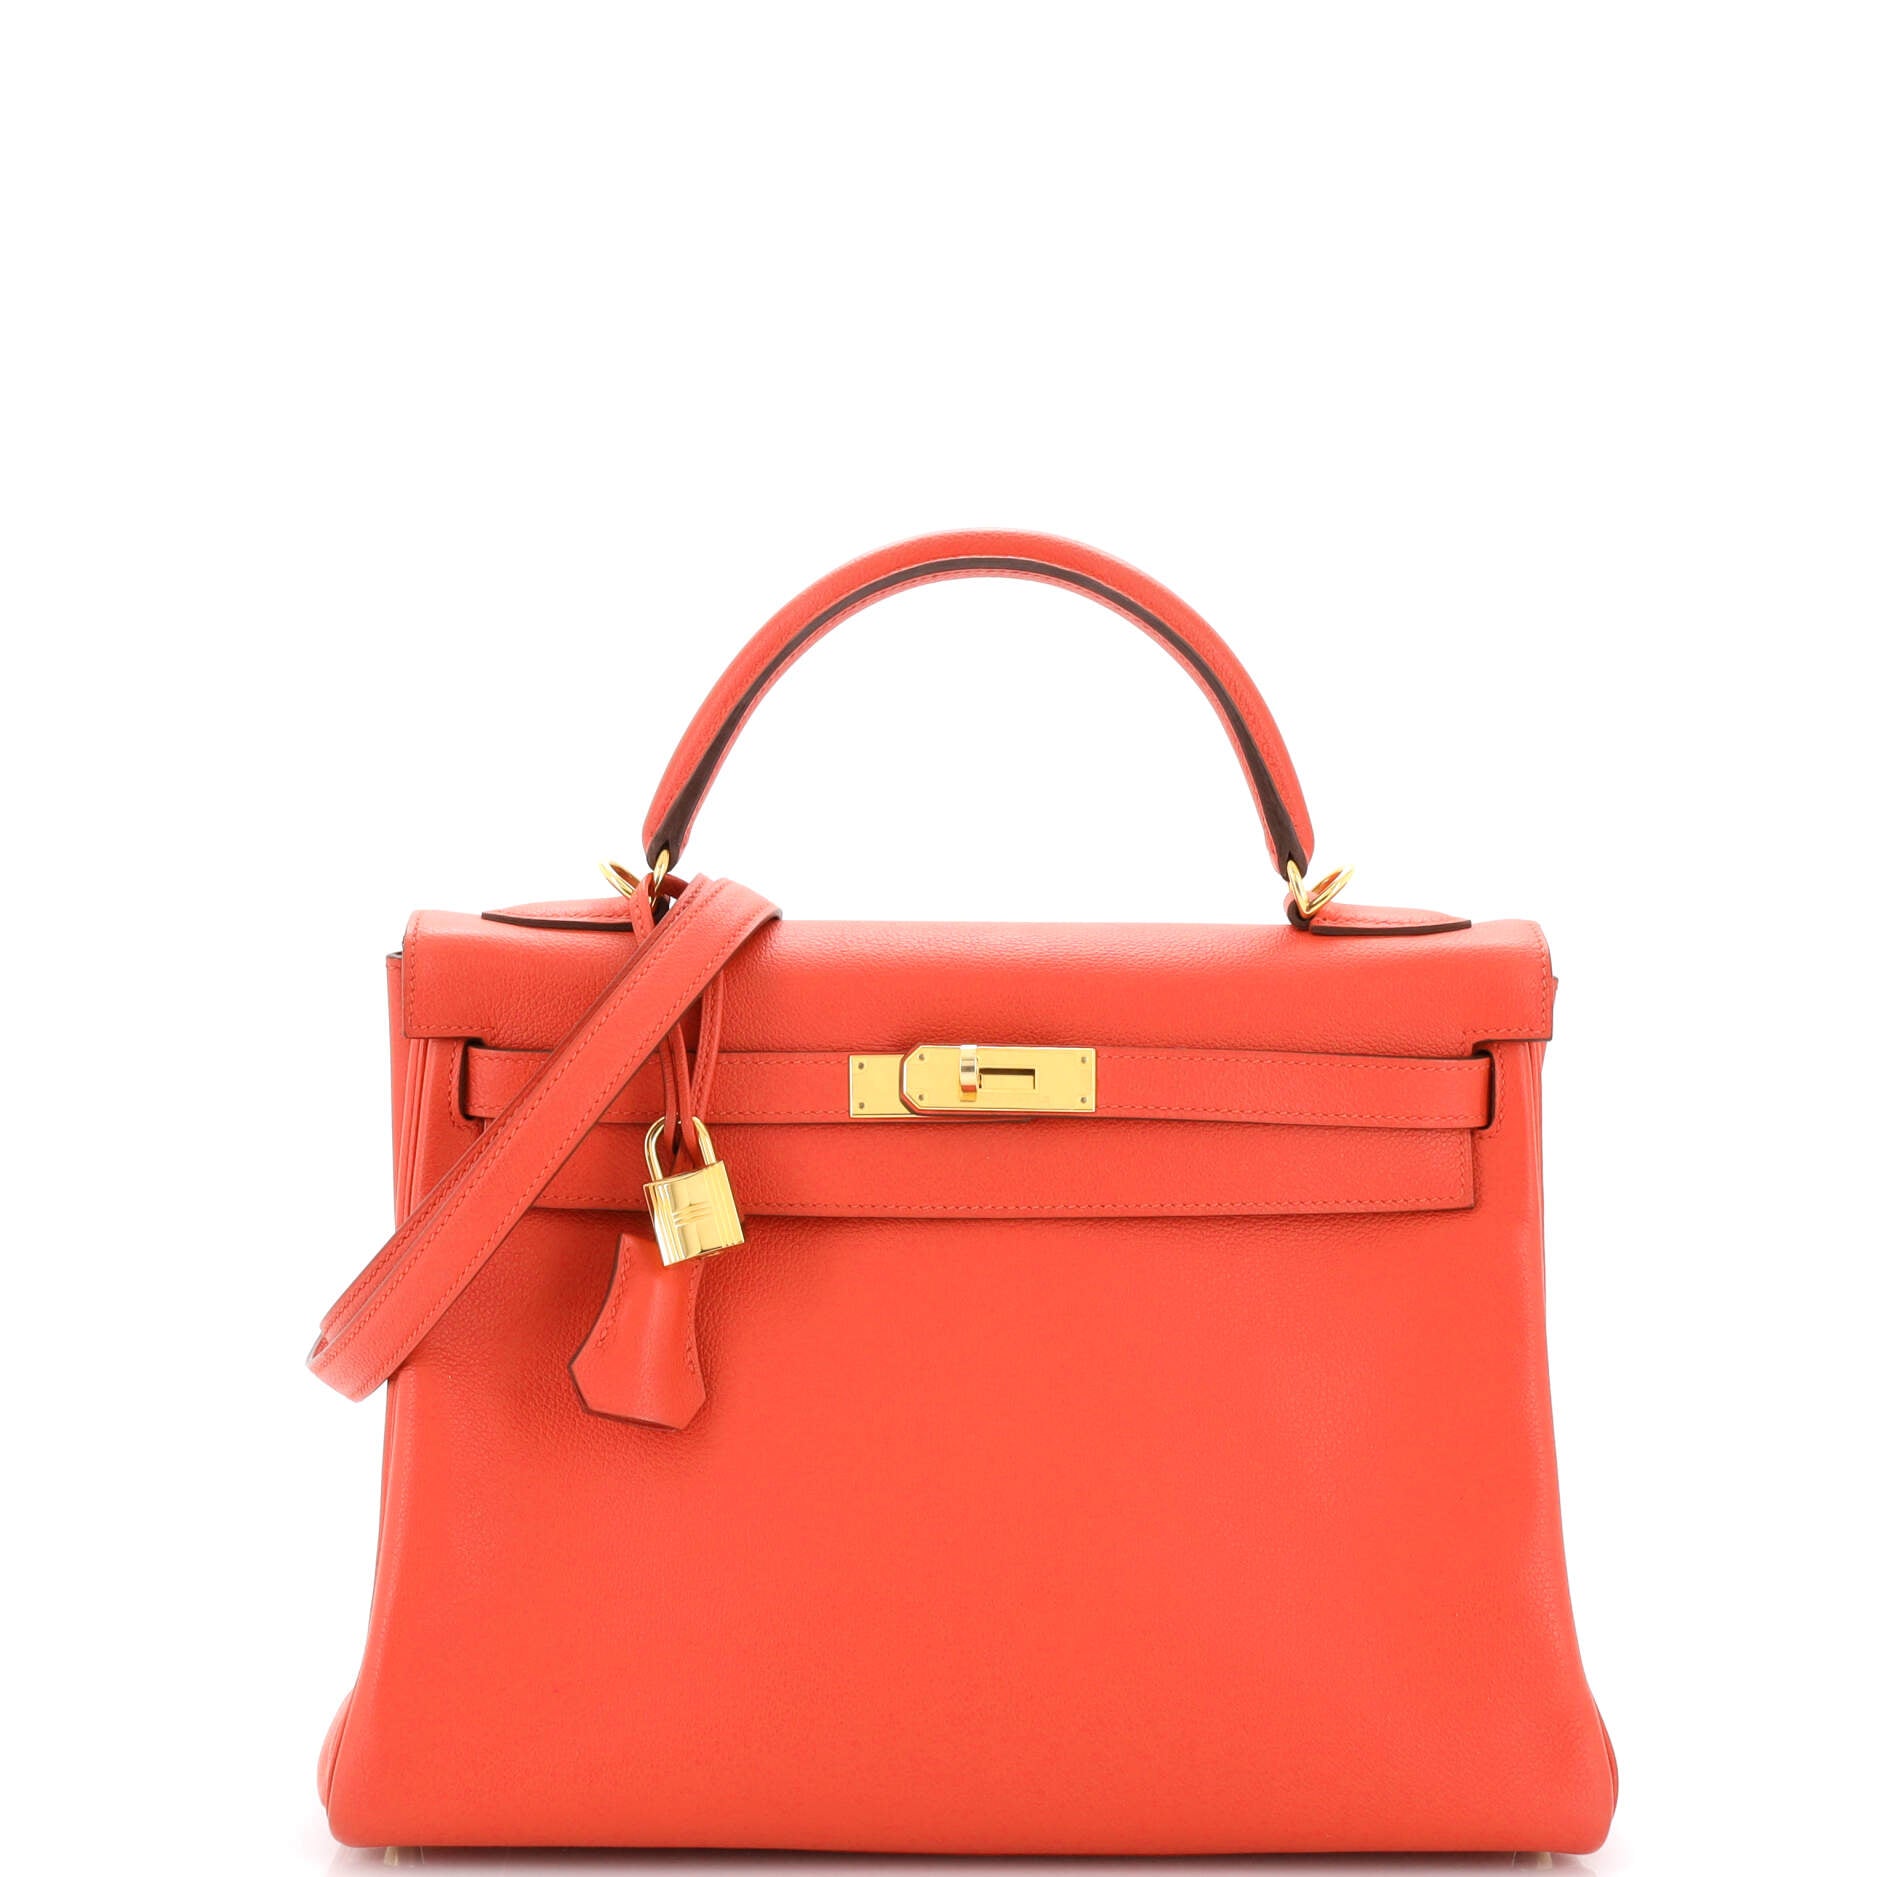 Hermes Kelly Handbag Rouge Tomate Evercolor with Gold Hardware 32